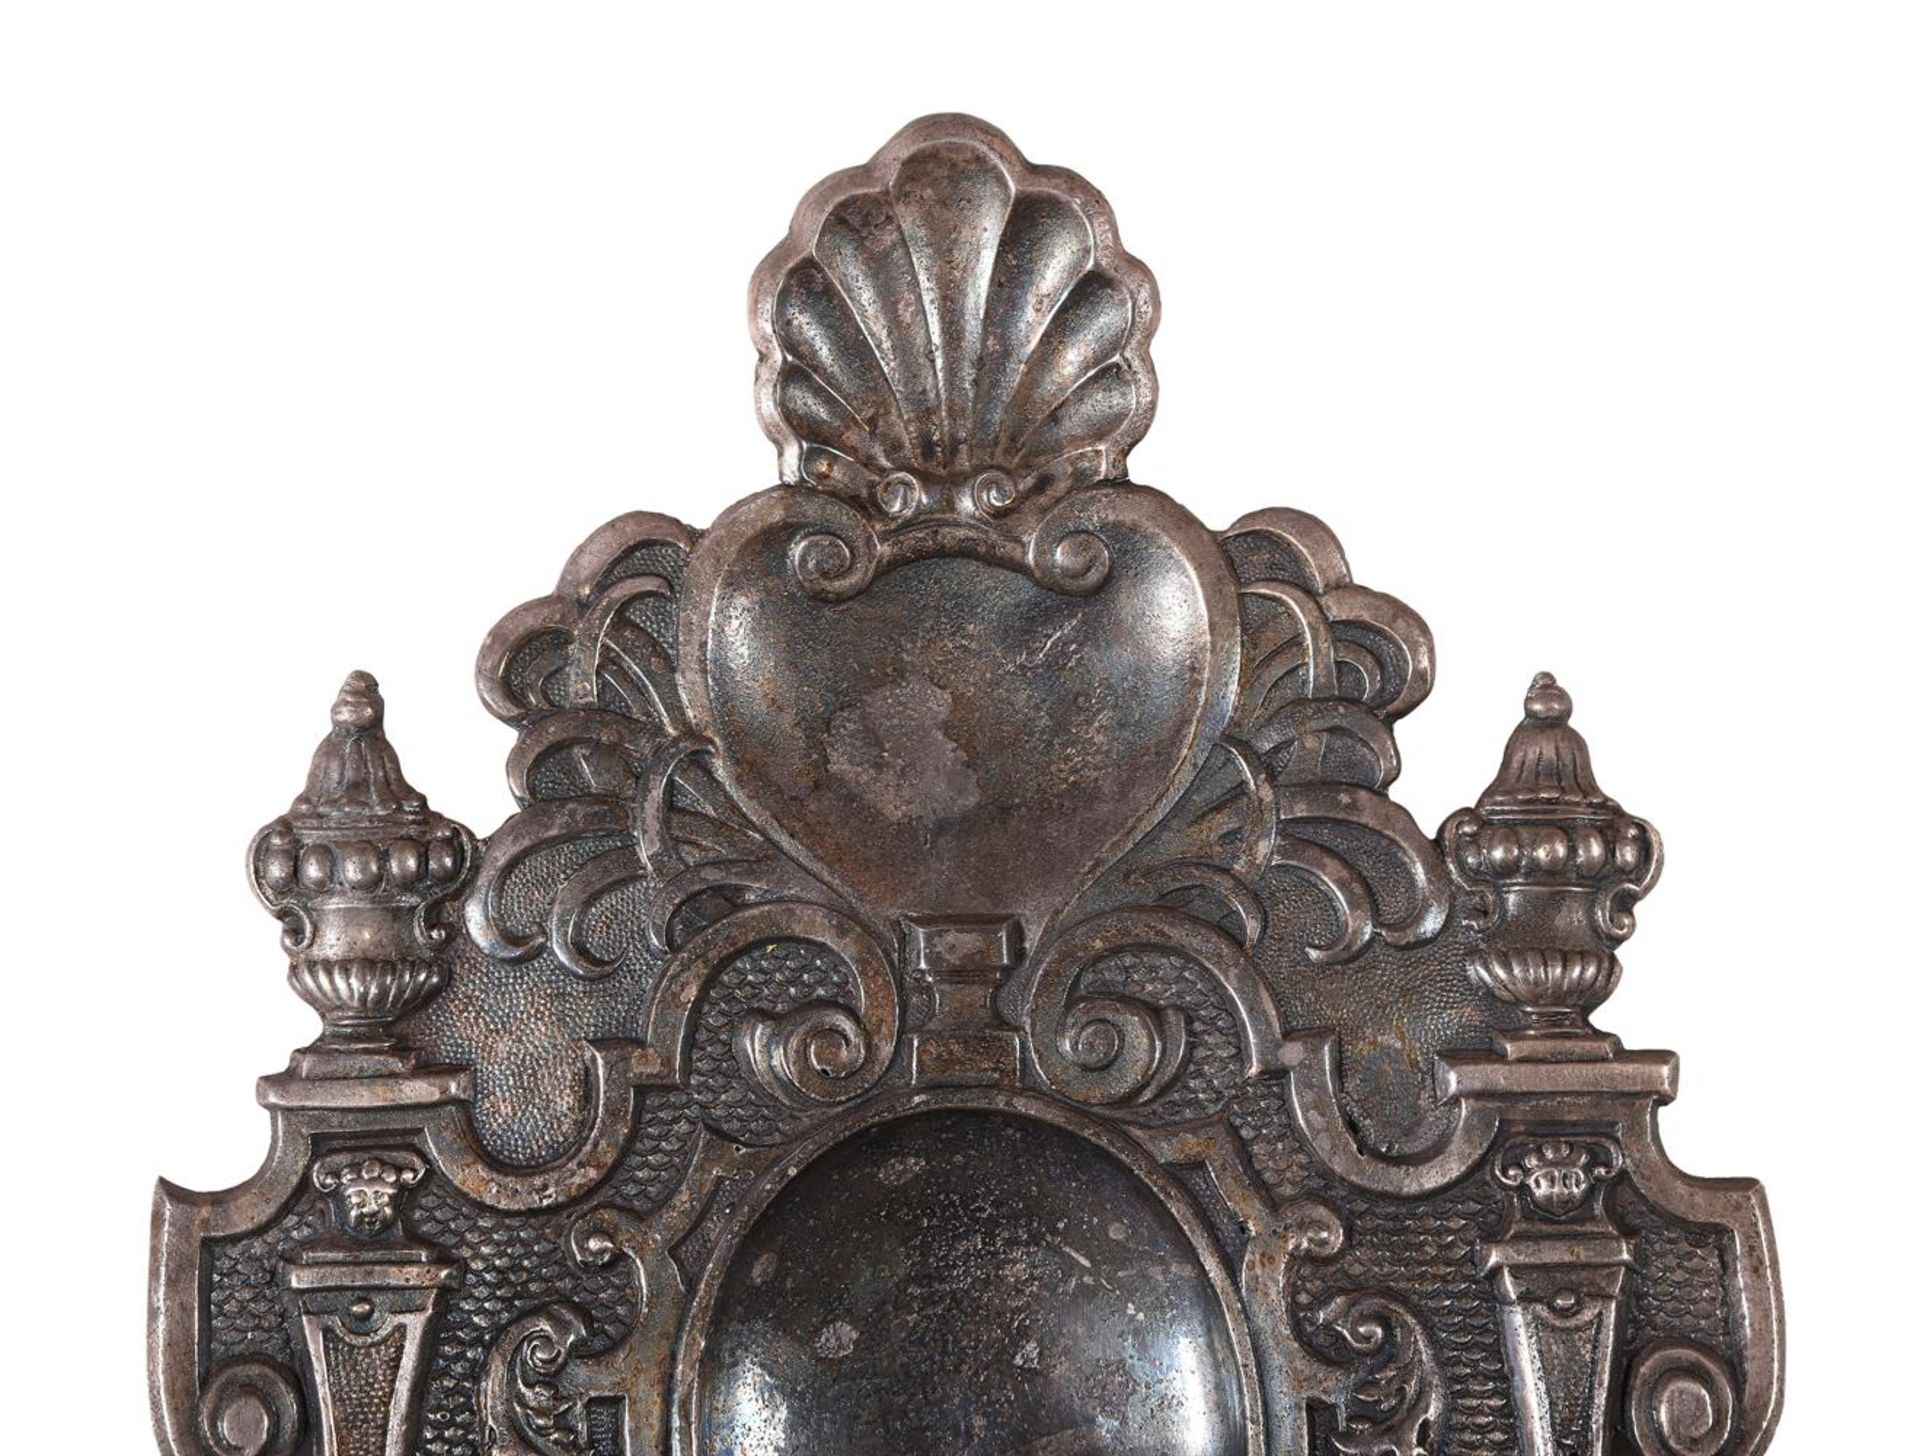 A PAIR OF POLISHED PEWTER WALL SCONCES, 19TH CENTURY, IN THE 17TH CENTURY MANNER - Image 4 of 5